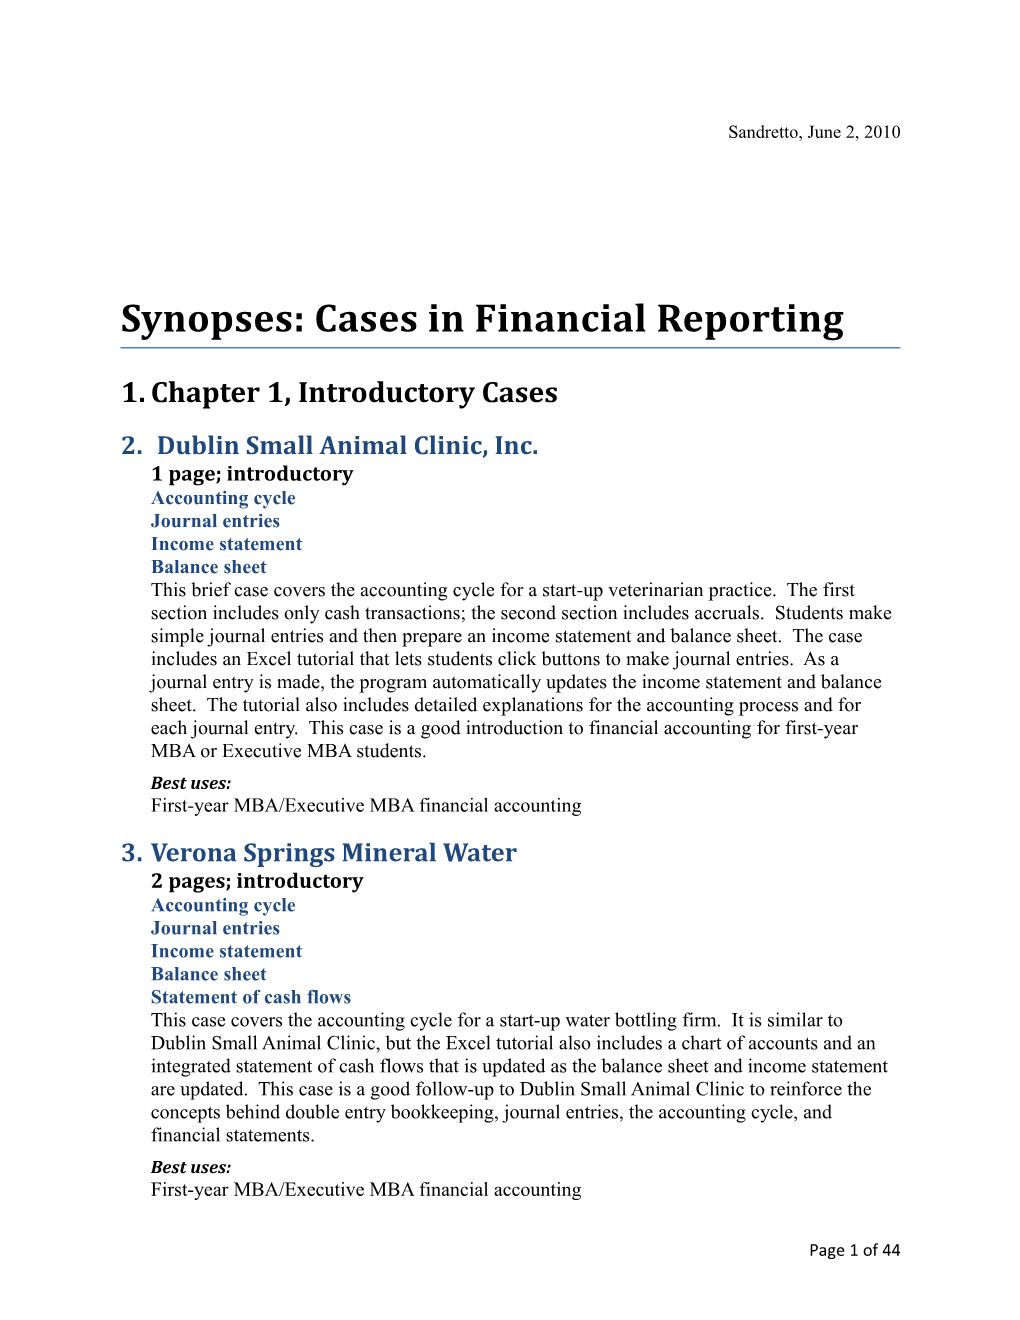 Synopses: Cases in Financial Reporting